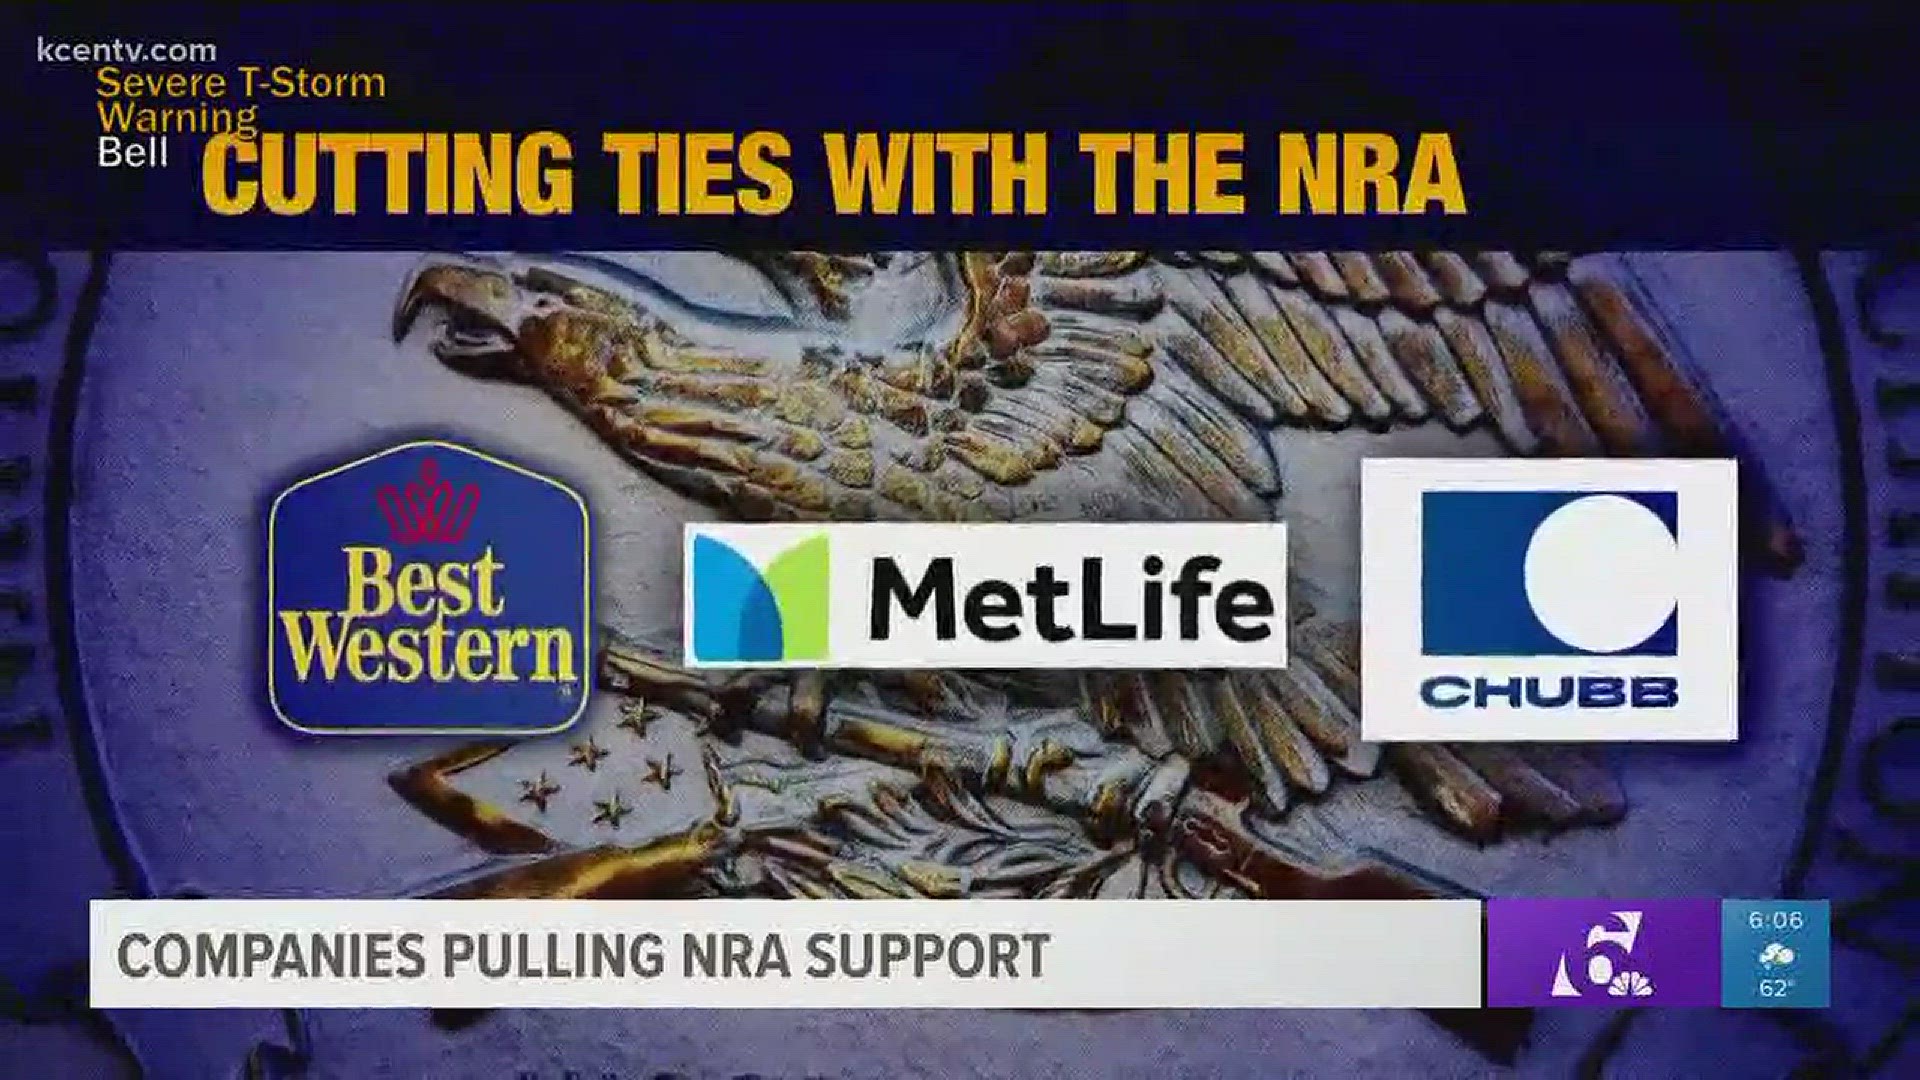 Companies pulling NRA support